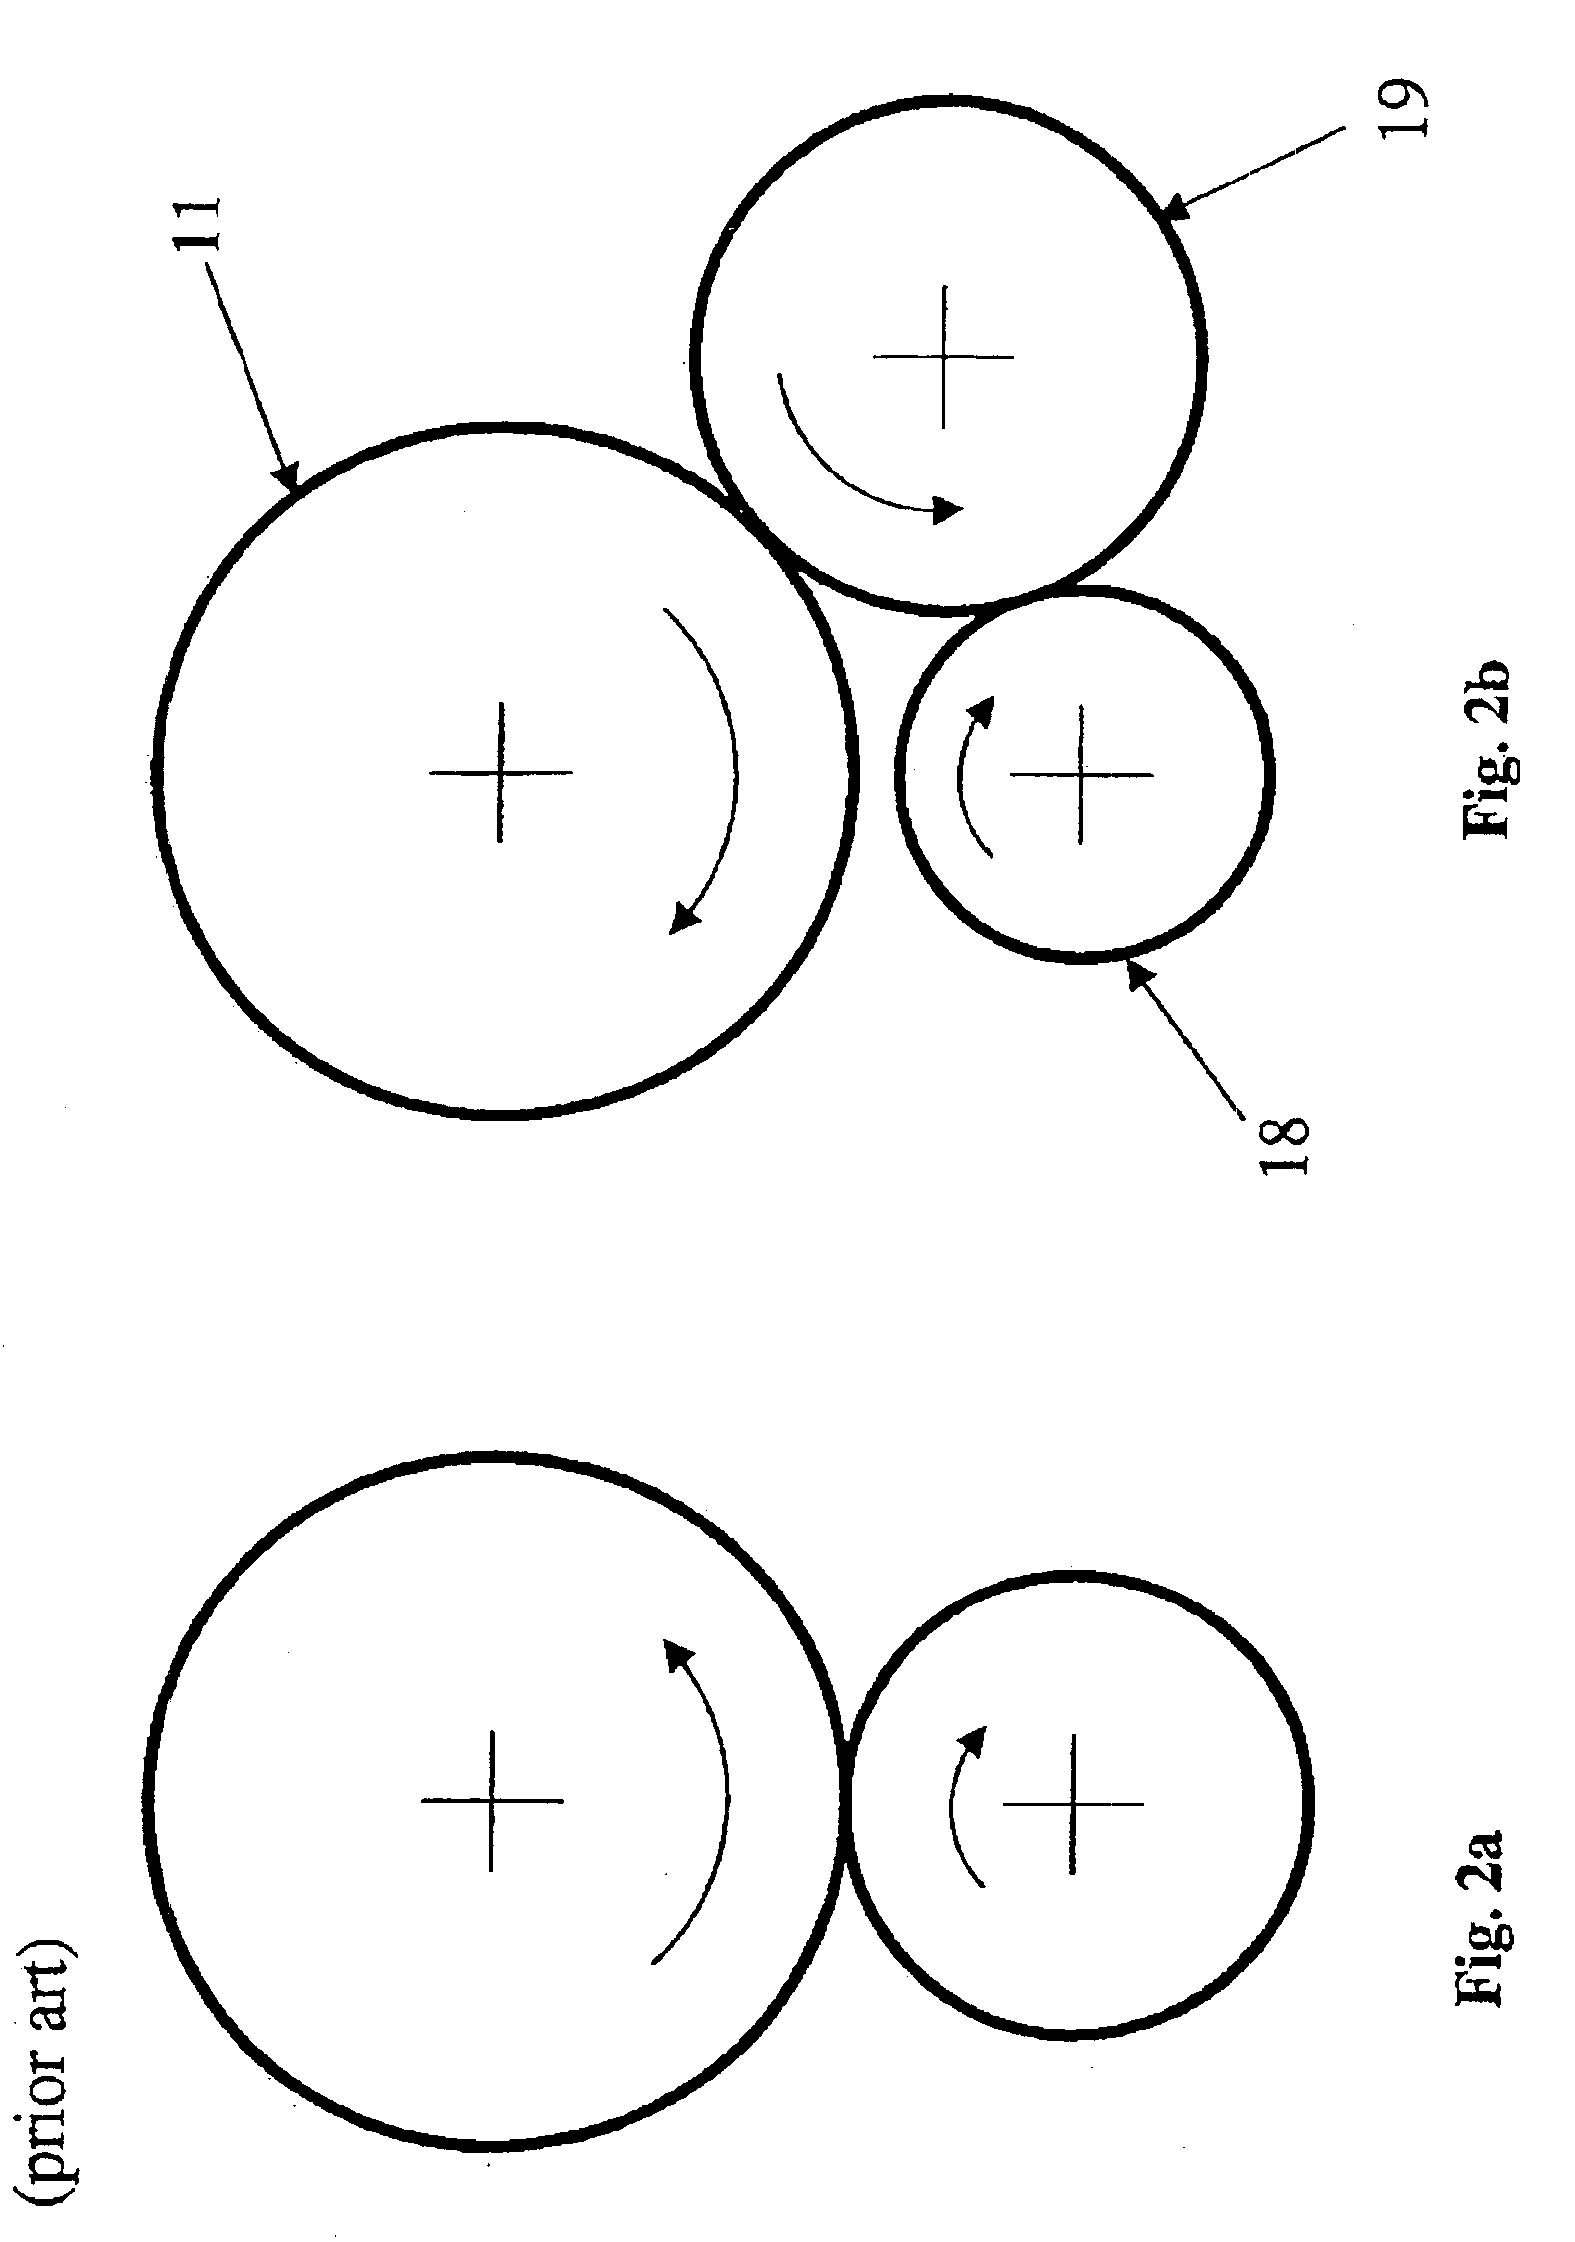 Lubrication device for stage-geared gearbox